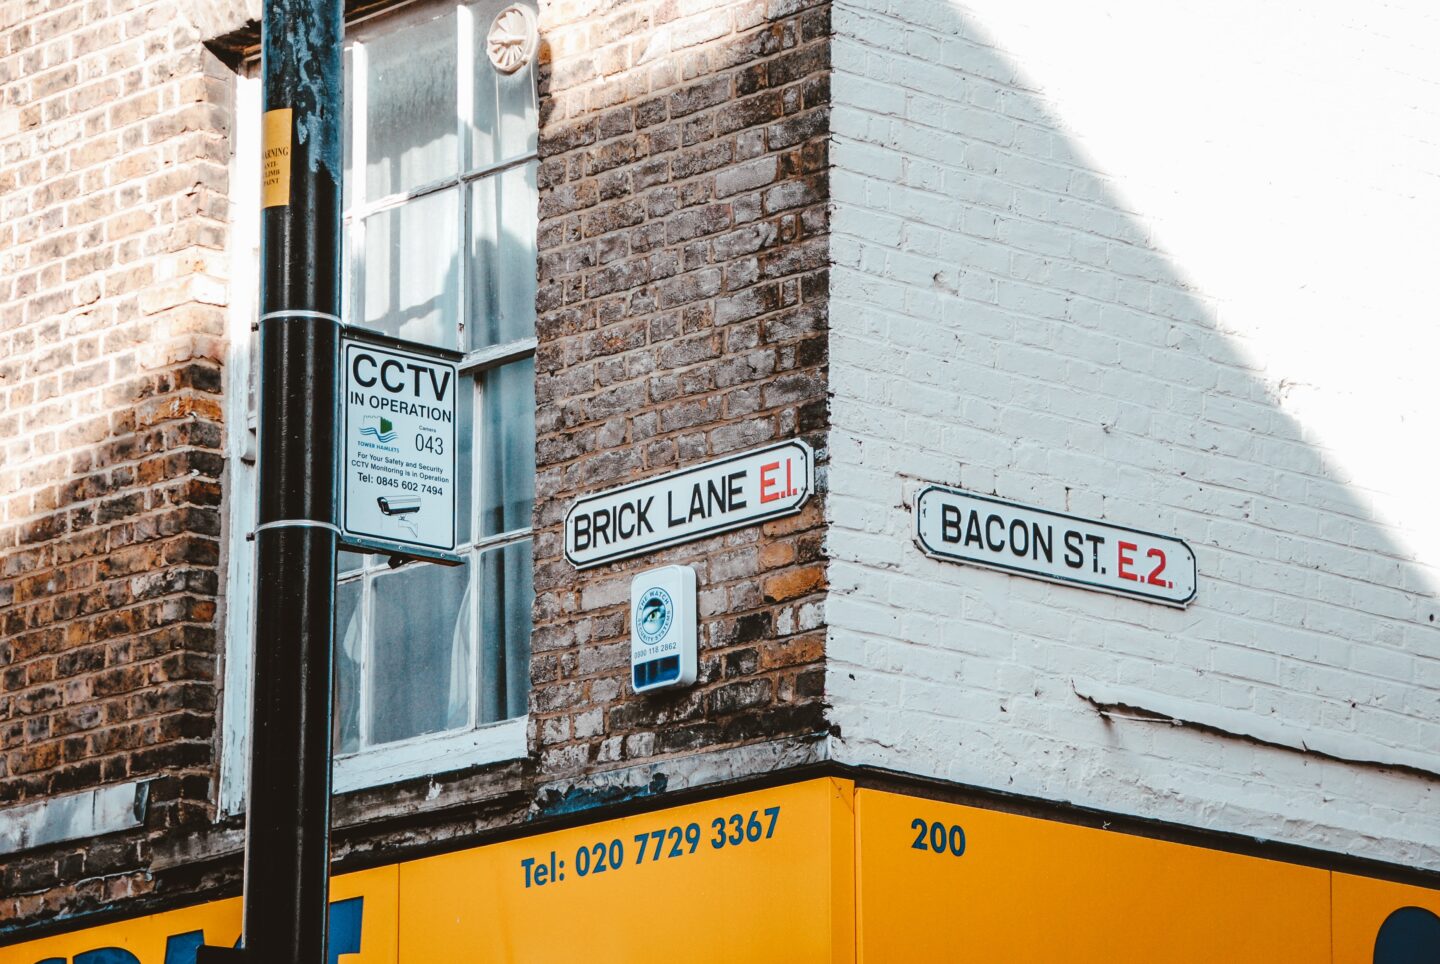 Brick Lane in East London is one of the best places to check out if you are a fan of Thrift Shopping